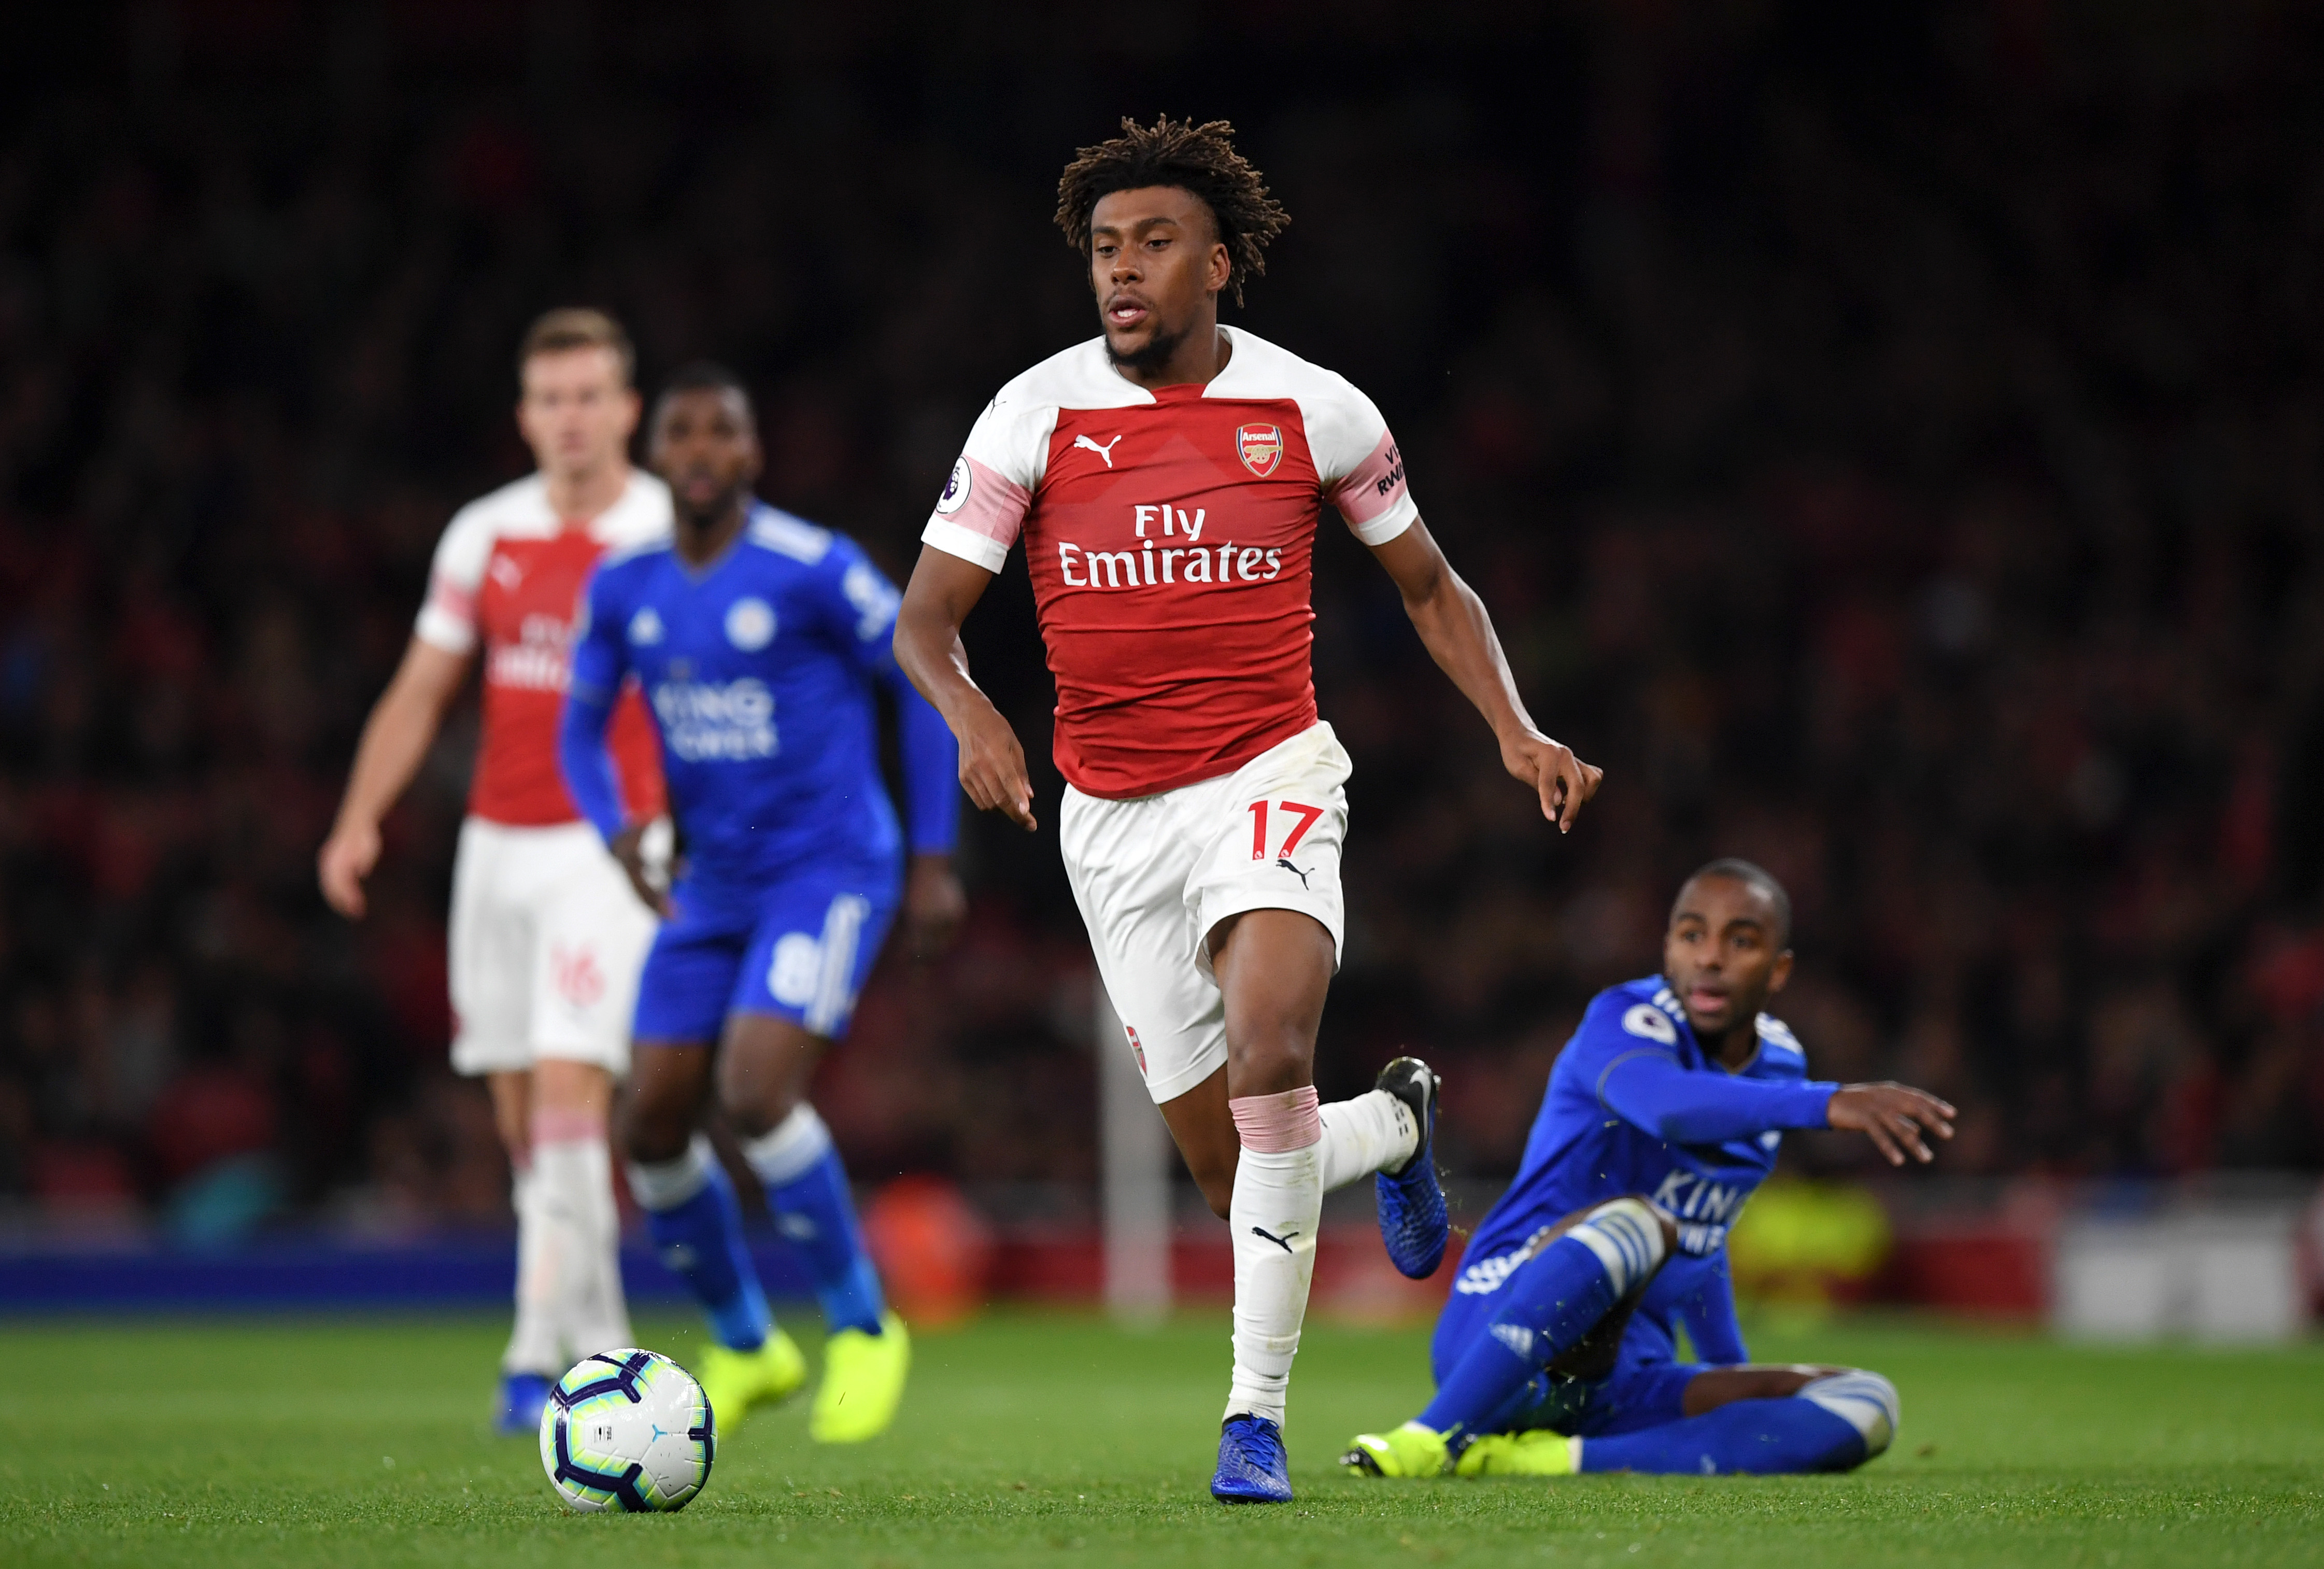 LONDON, ENGLAND - OCTOBER 22:  Alex Iwobi of Arsenal is tackled by Ricardo Pereira of Leicester City during the Premier League match between Arsenal FC and Leicester City at Emirates Stadium on October 22, 2018 in London, United Kingdom.  (Photo by Shaun Botterill/Getty Images)